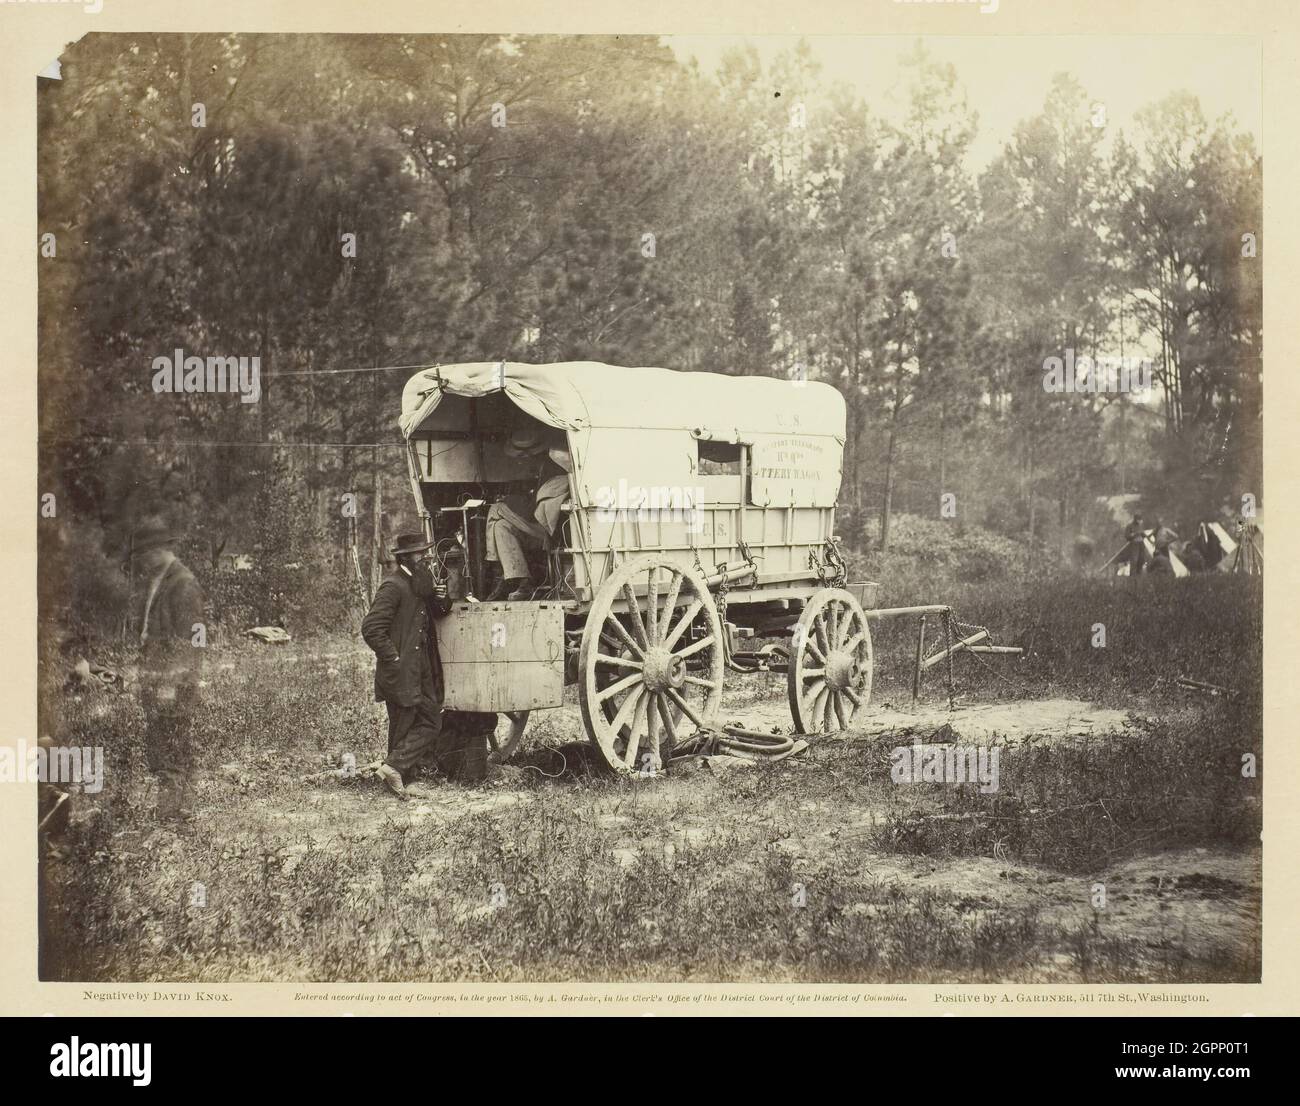 Field Telegraph, Battery Wagon, September 1864. [Scene from the American  Civil War: covered wagon with 'US Military Telegraph Headquarters' written  on the side. Inside a man is using telegraphy equipment]. Albumen print,